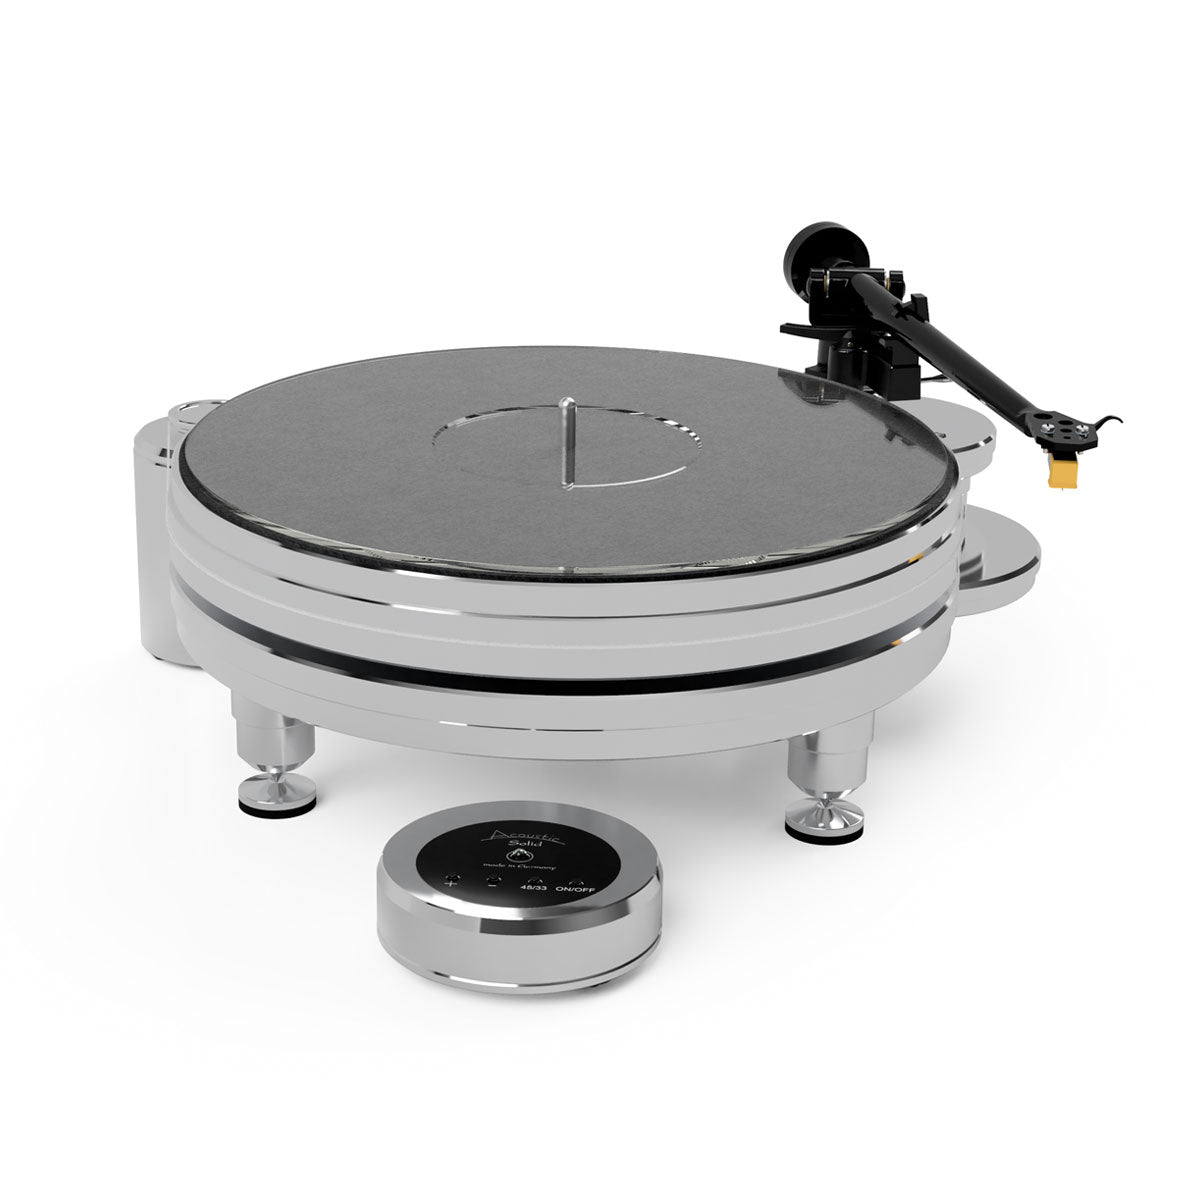 ACOUSTIC SOLID - SOLID 111 METAL TURNTABLE - Experience a listening pleasure in perfection with the High-quality technology and acoustics with Acoustic Solid. Best price at Vinyl Sound for all Acoustic Solid Turntables, Cartridges, tonearms and Phono Amplifiers: Acoustic Solid - Solid Brake - Acoustic Solid - Solid Machine – Acoustic Solid - Solid Edition – Acoustic Solid - Solid Royal – Acoustic Solid - Solid Stand